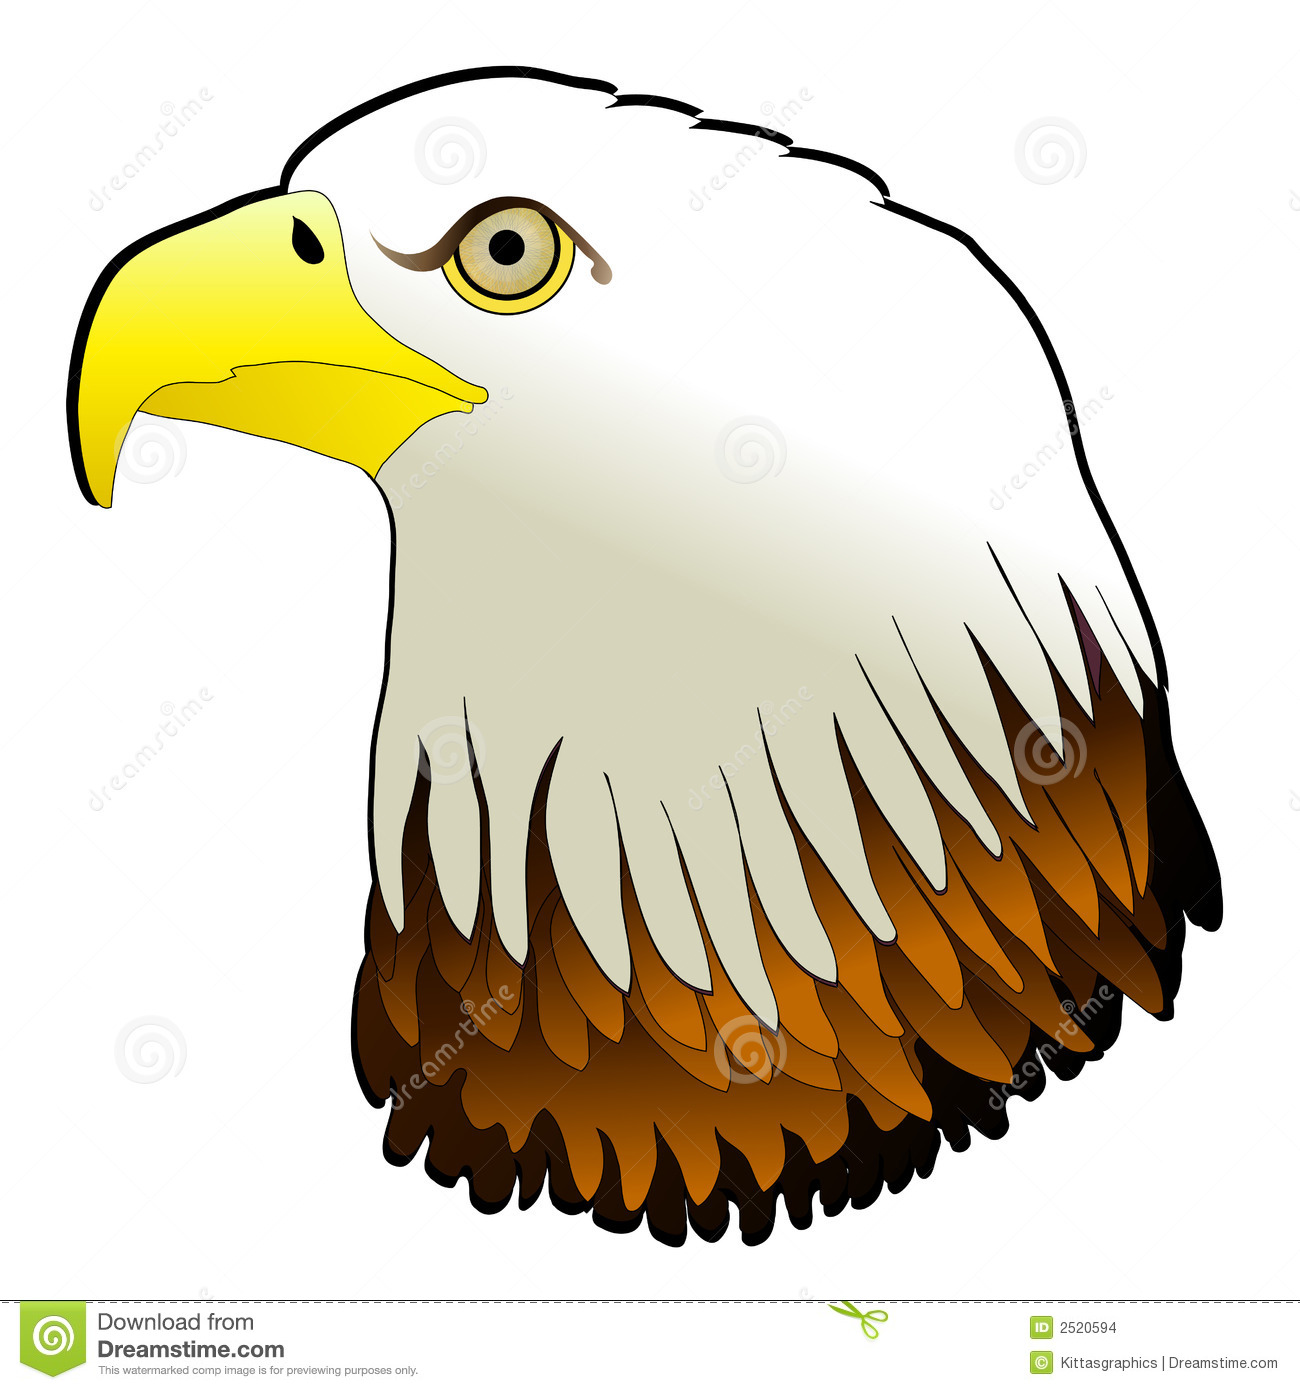 Eagle Clip Art With Raised Wings   Clipart Panda   Free Clipart Images